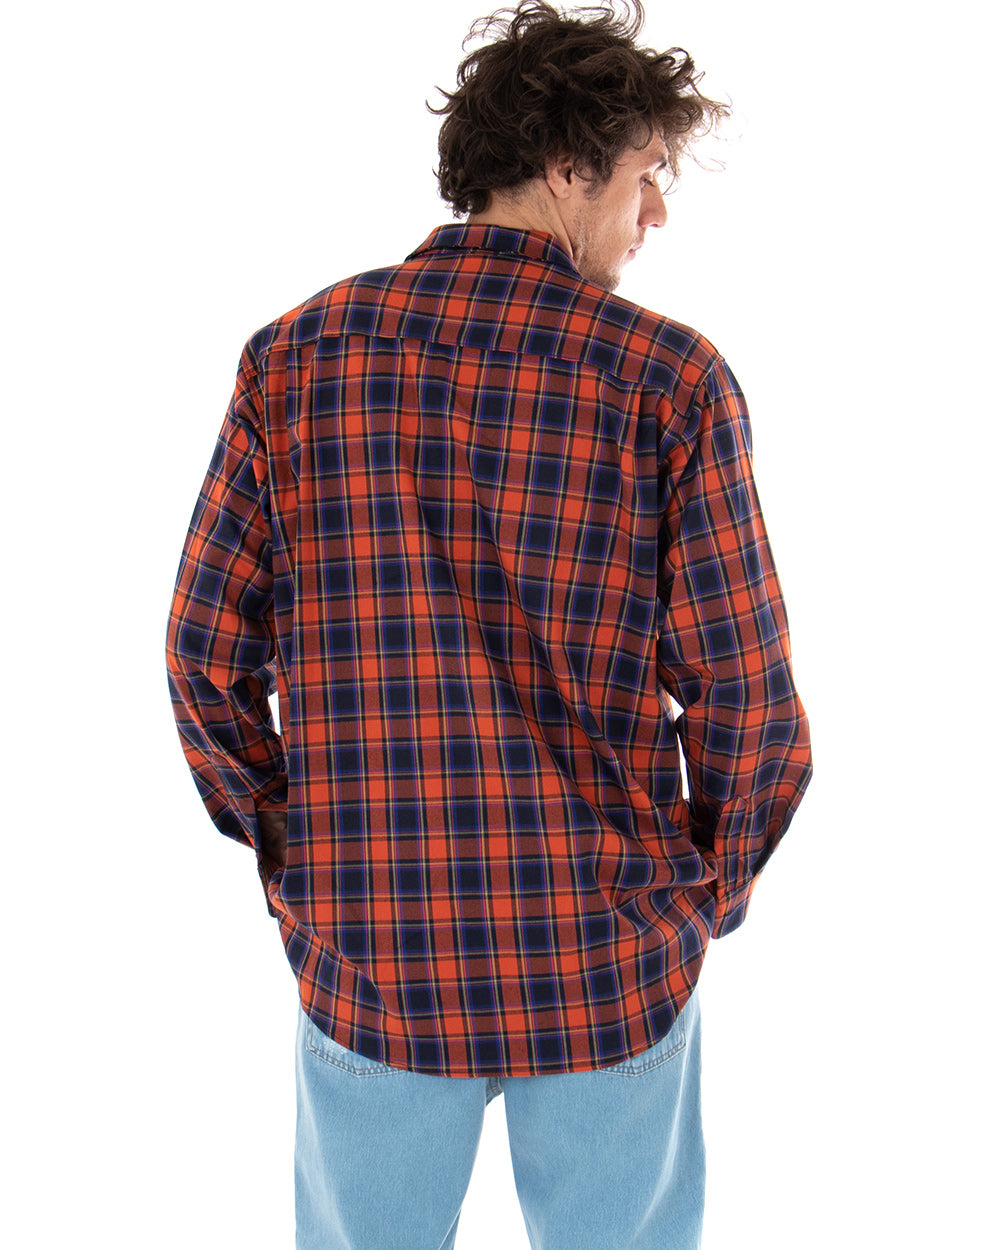 Men's Shirt With Oversized Checked Viscose Collar GIOSAL-C1923A